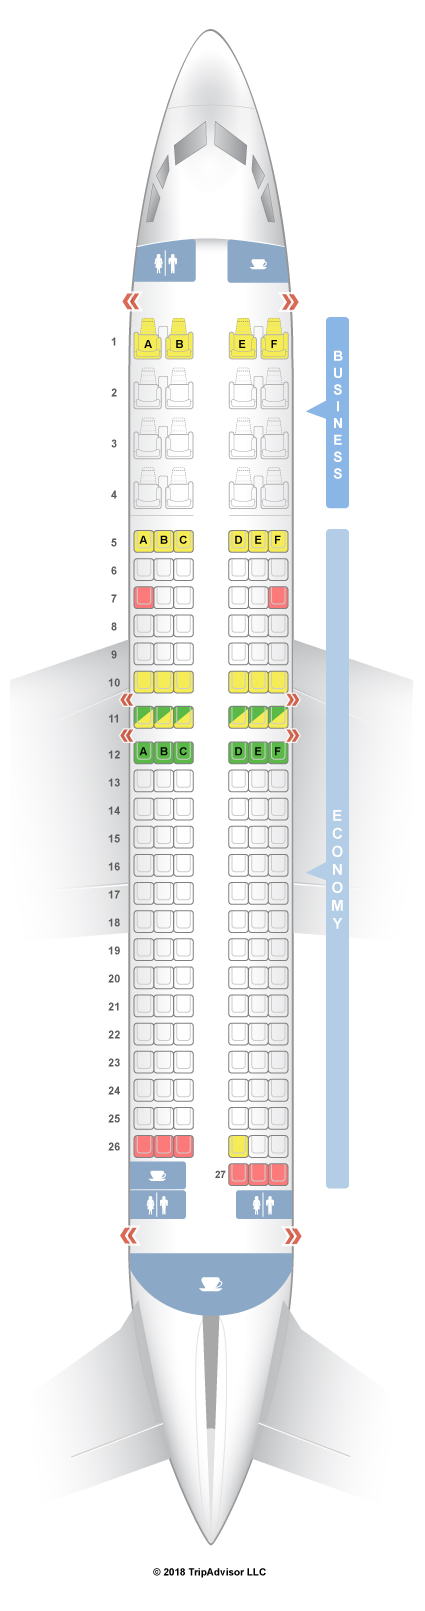 Turkish Airlines Boeing 737 800 Seat Map | Hot Sex Picture